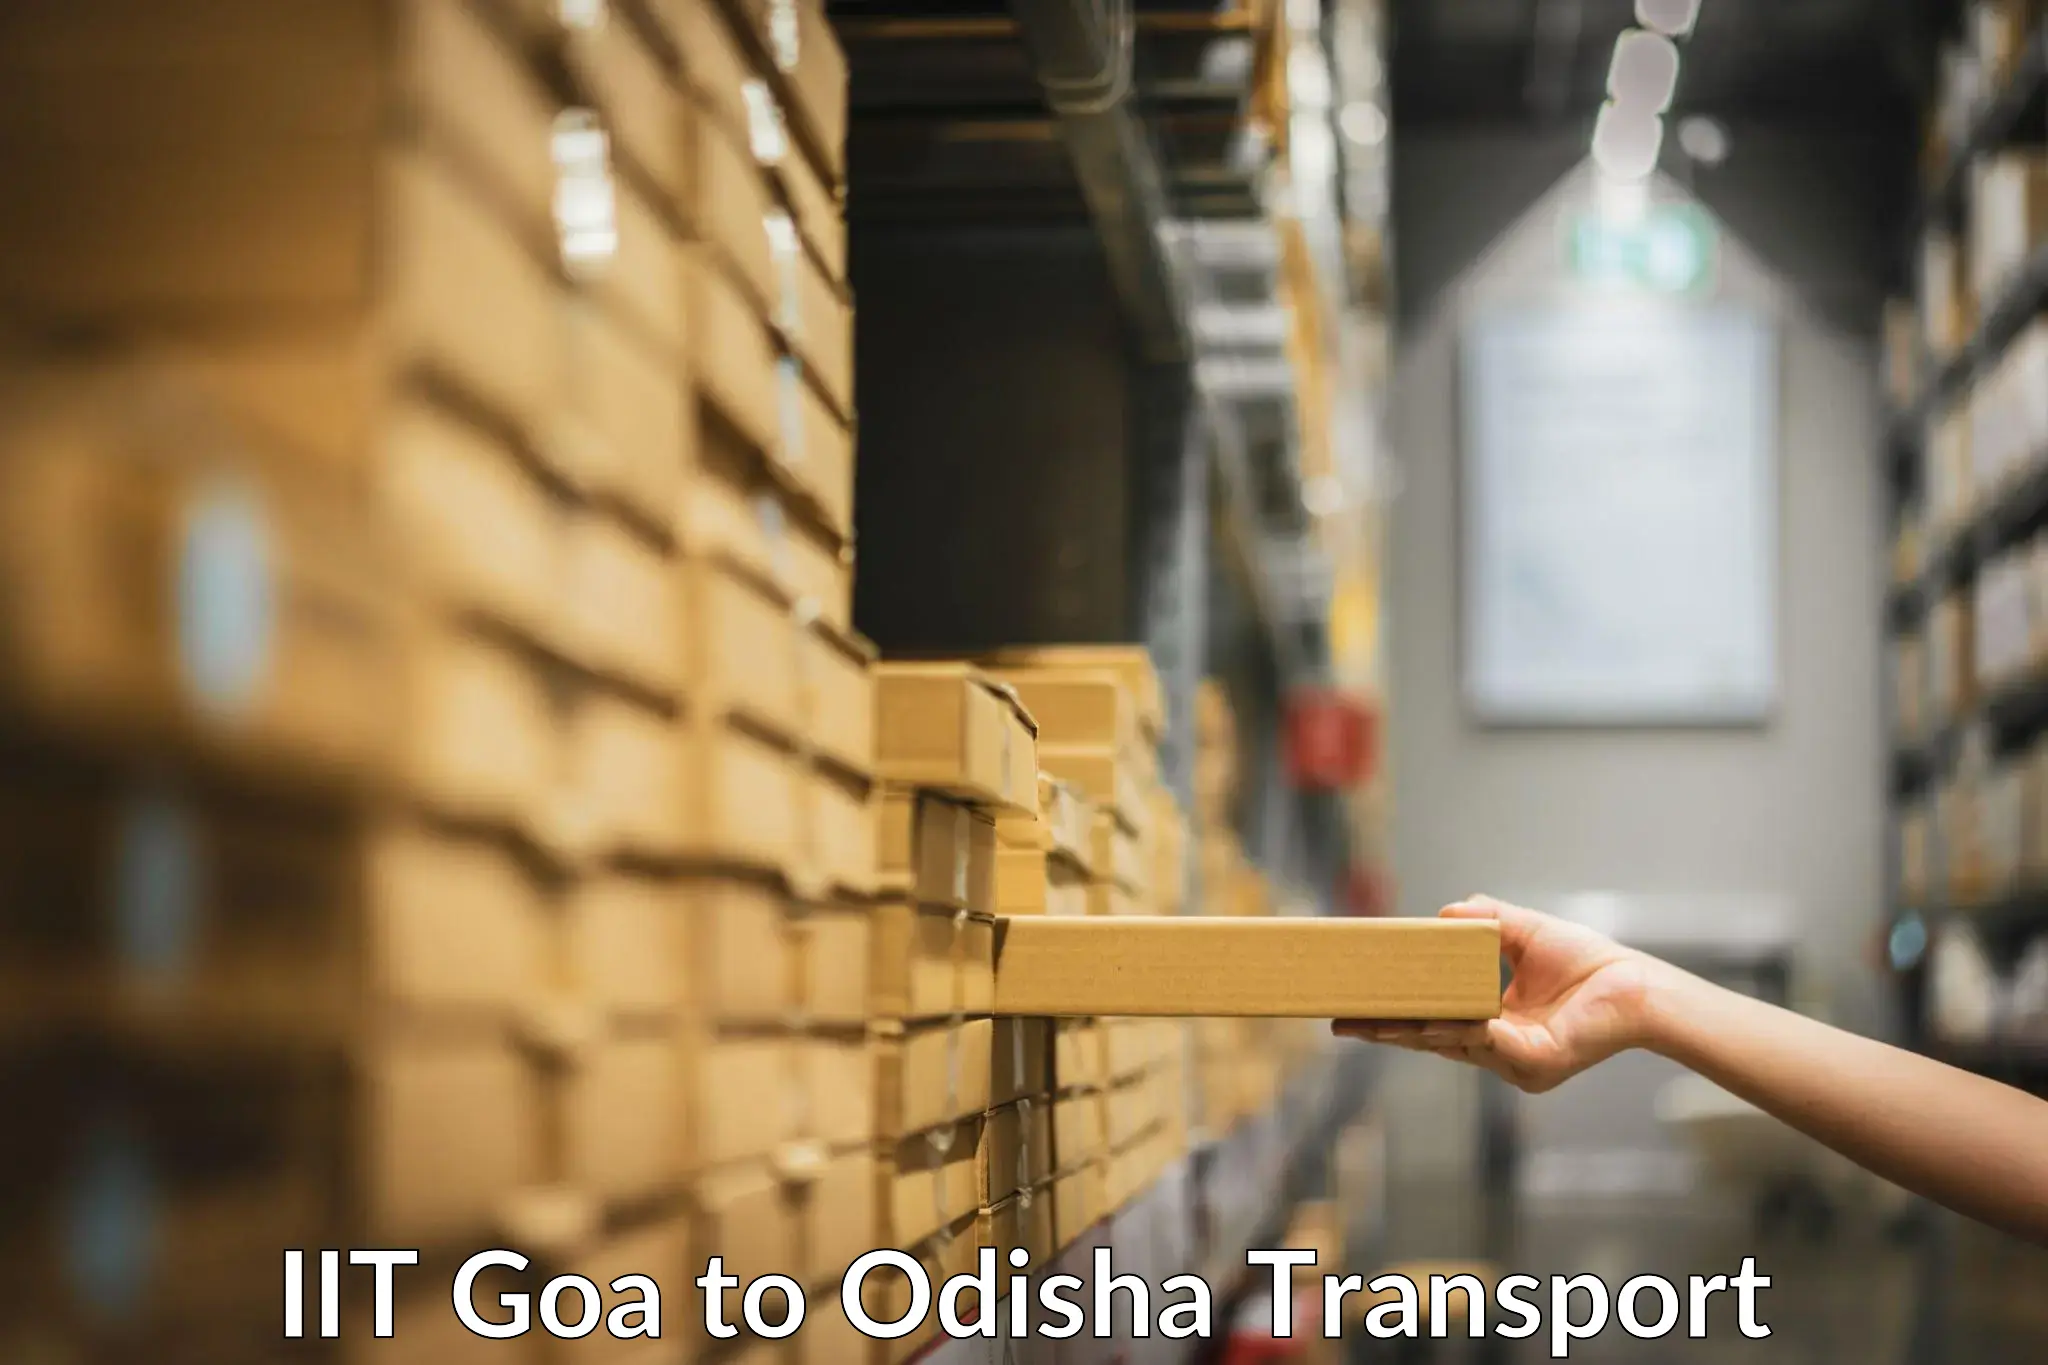 Transport in sharing IIT Goa to Paradip Port